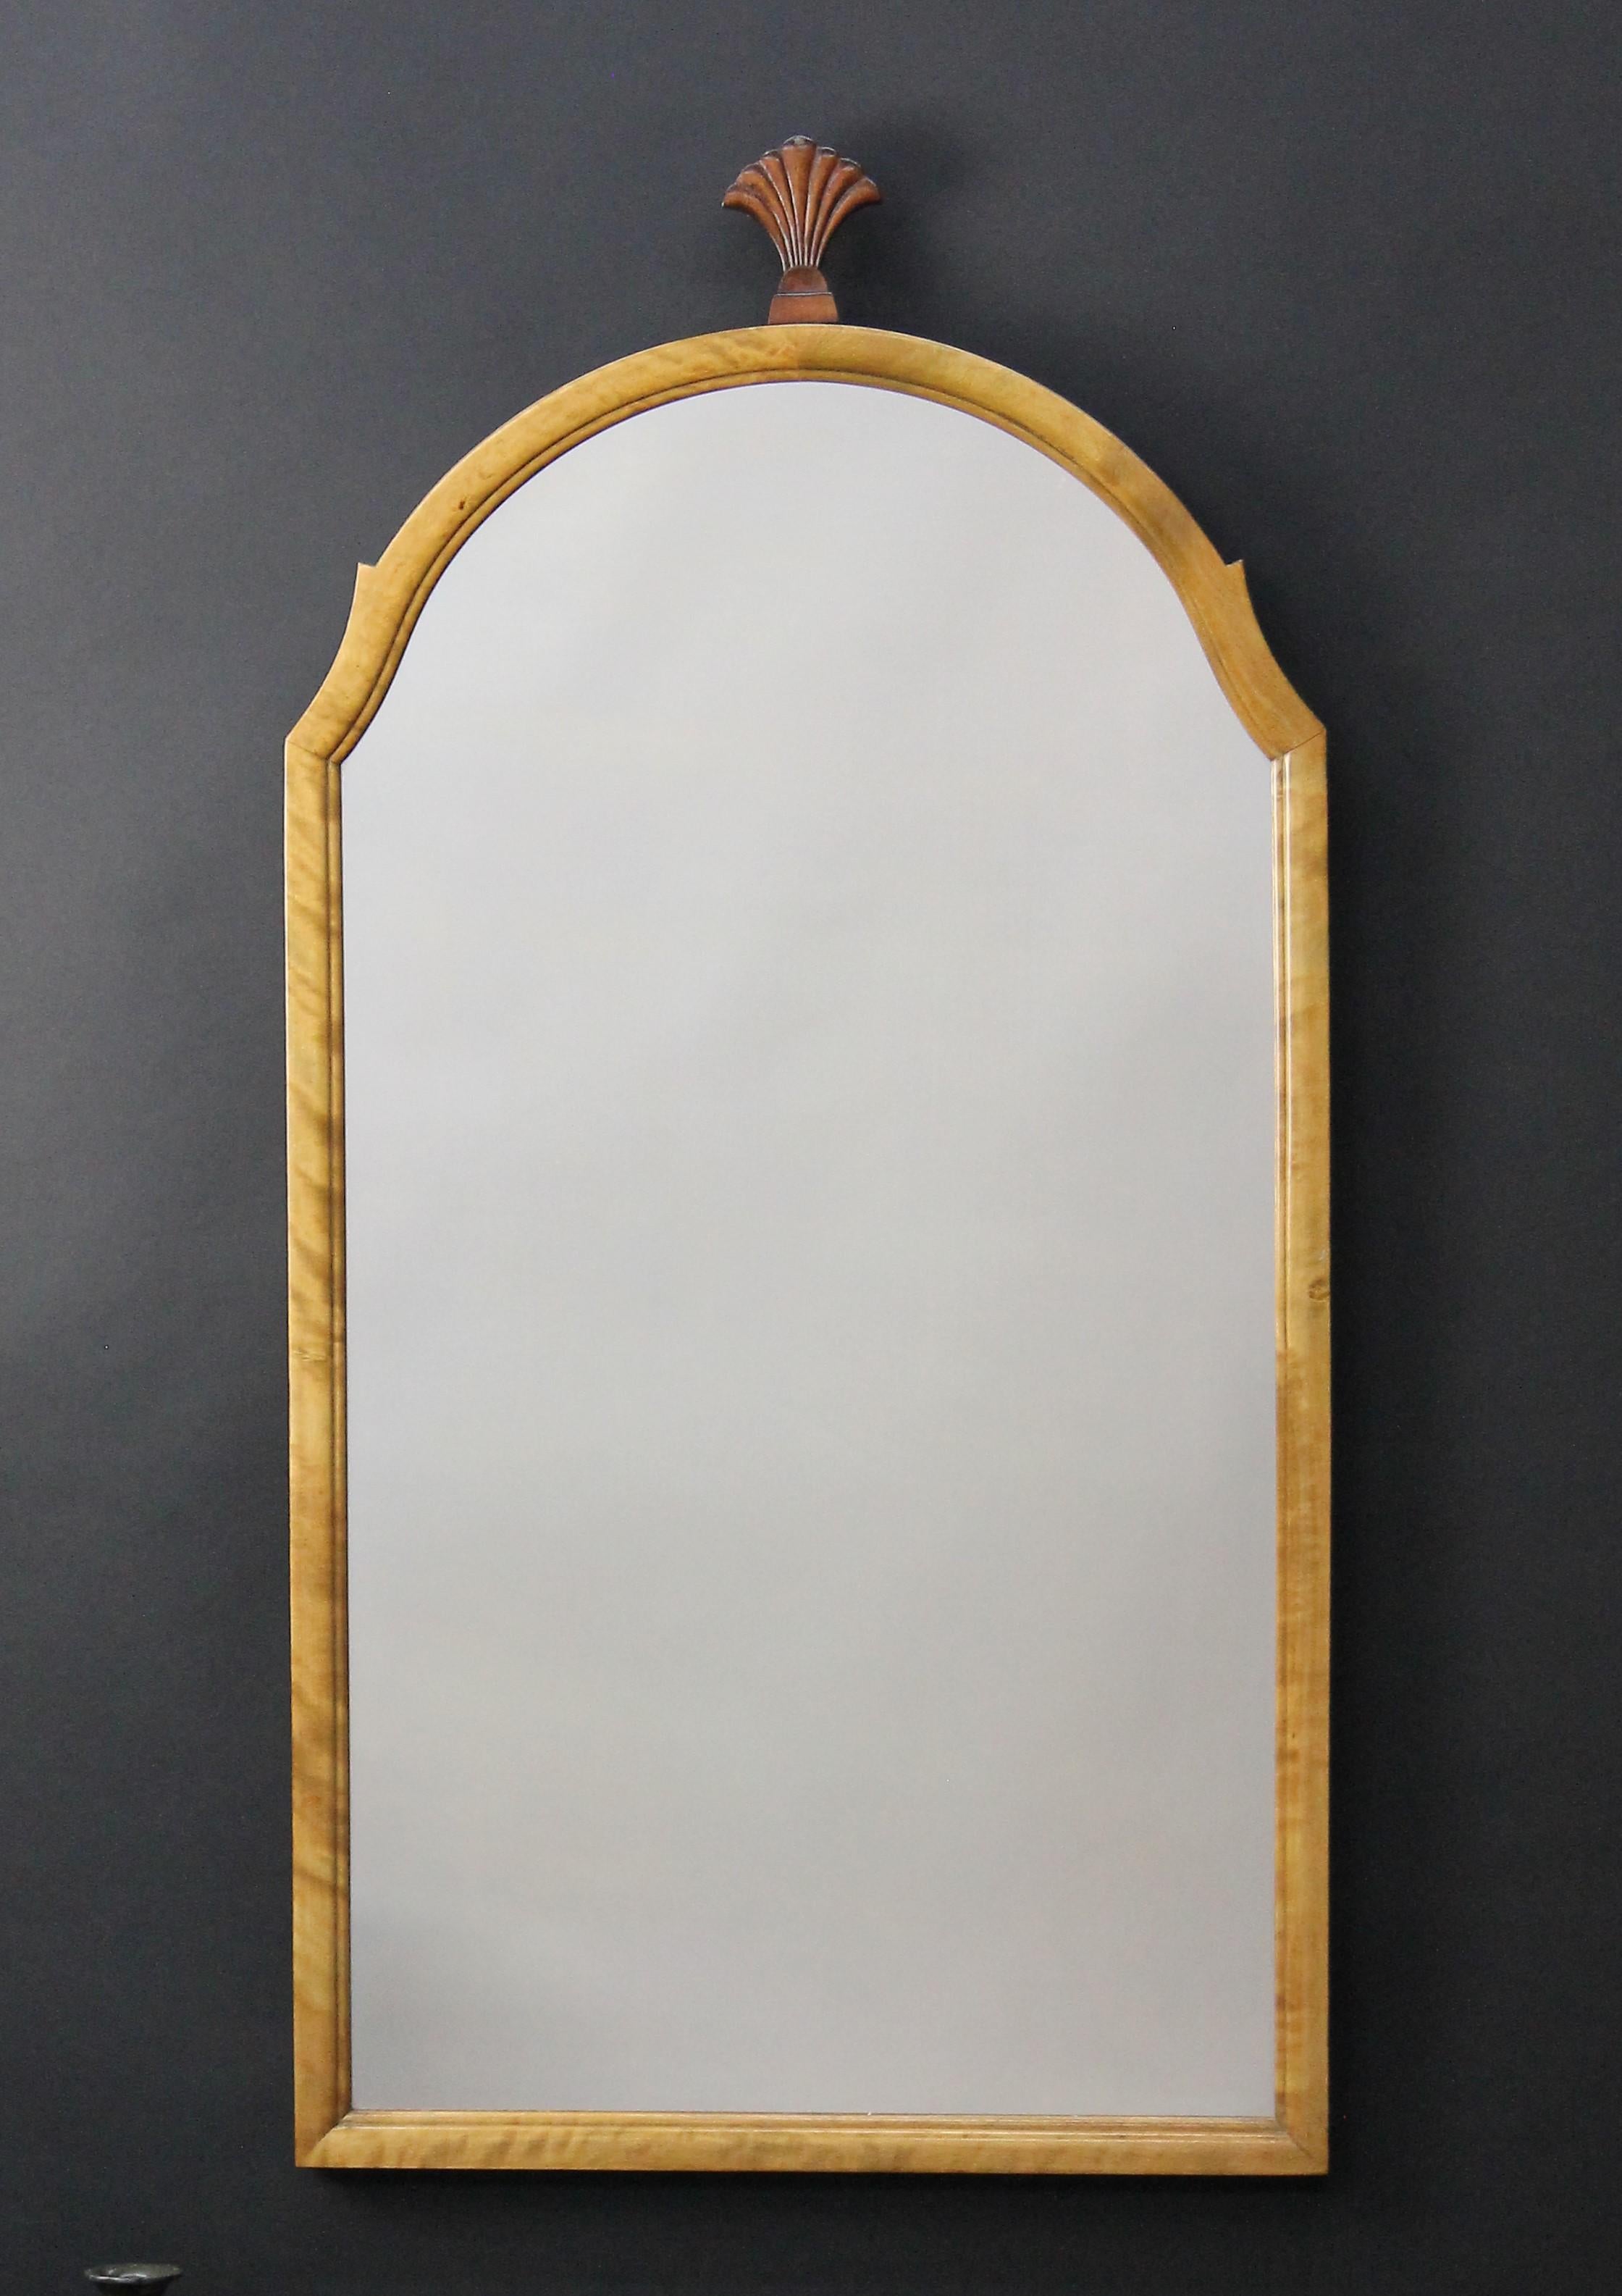 Unusual Swedish Grace Art Deco mirror.
Made in two different colored birchwoods.
Really nice original condition. The mirror plate is also original.
On top is a finely carved crest.



